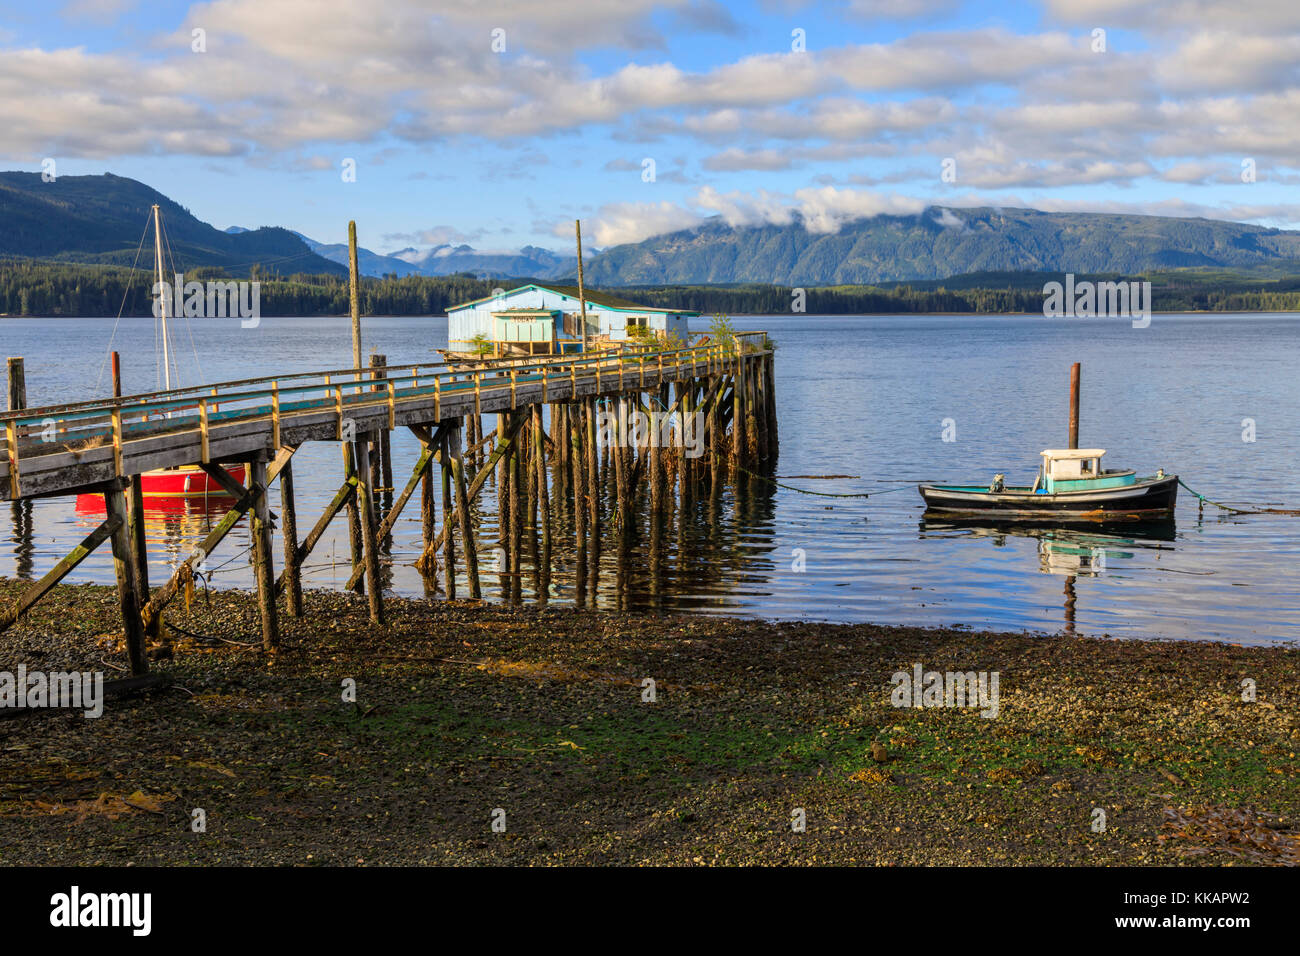 Alert Bay, boats, old dock building and jetty on piles, Vancouver Island, Inside Passage, British Columbia, Canada, North America Stock Photo